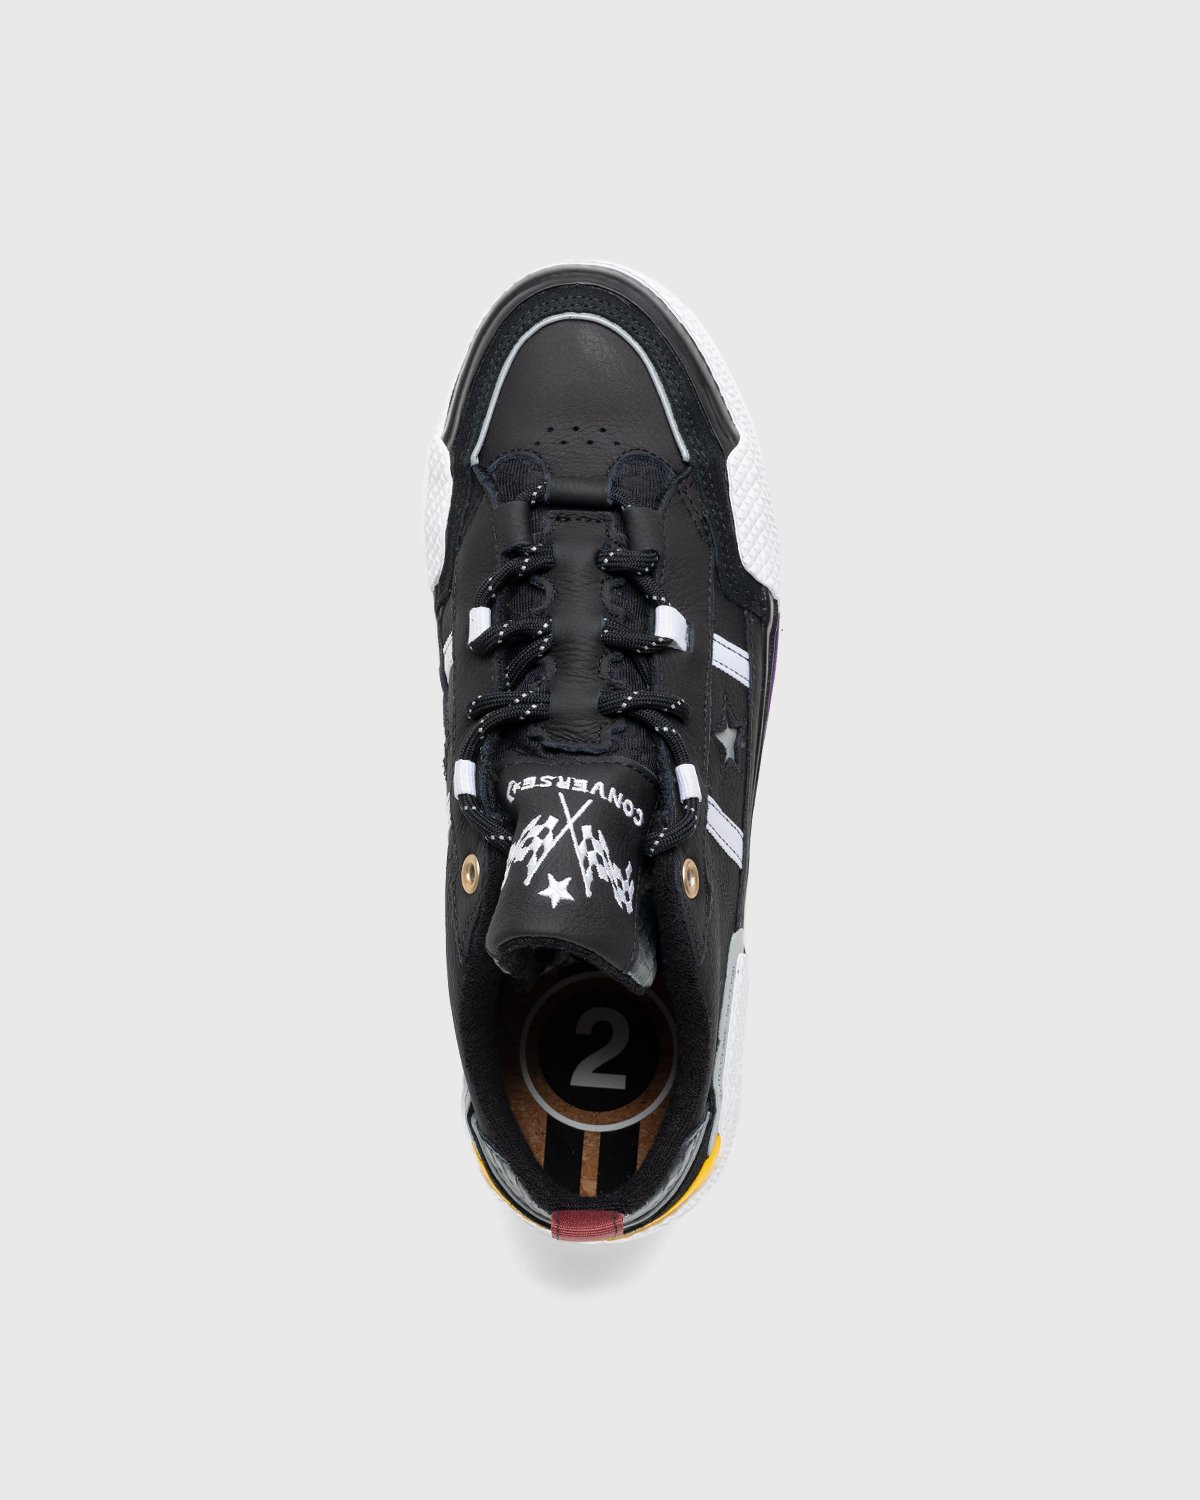 Converse x IBN Japser - One Star Ox Black/White/Spectra Yellow - Footwear - Black - Image 5